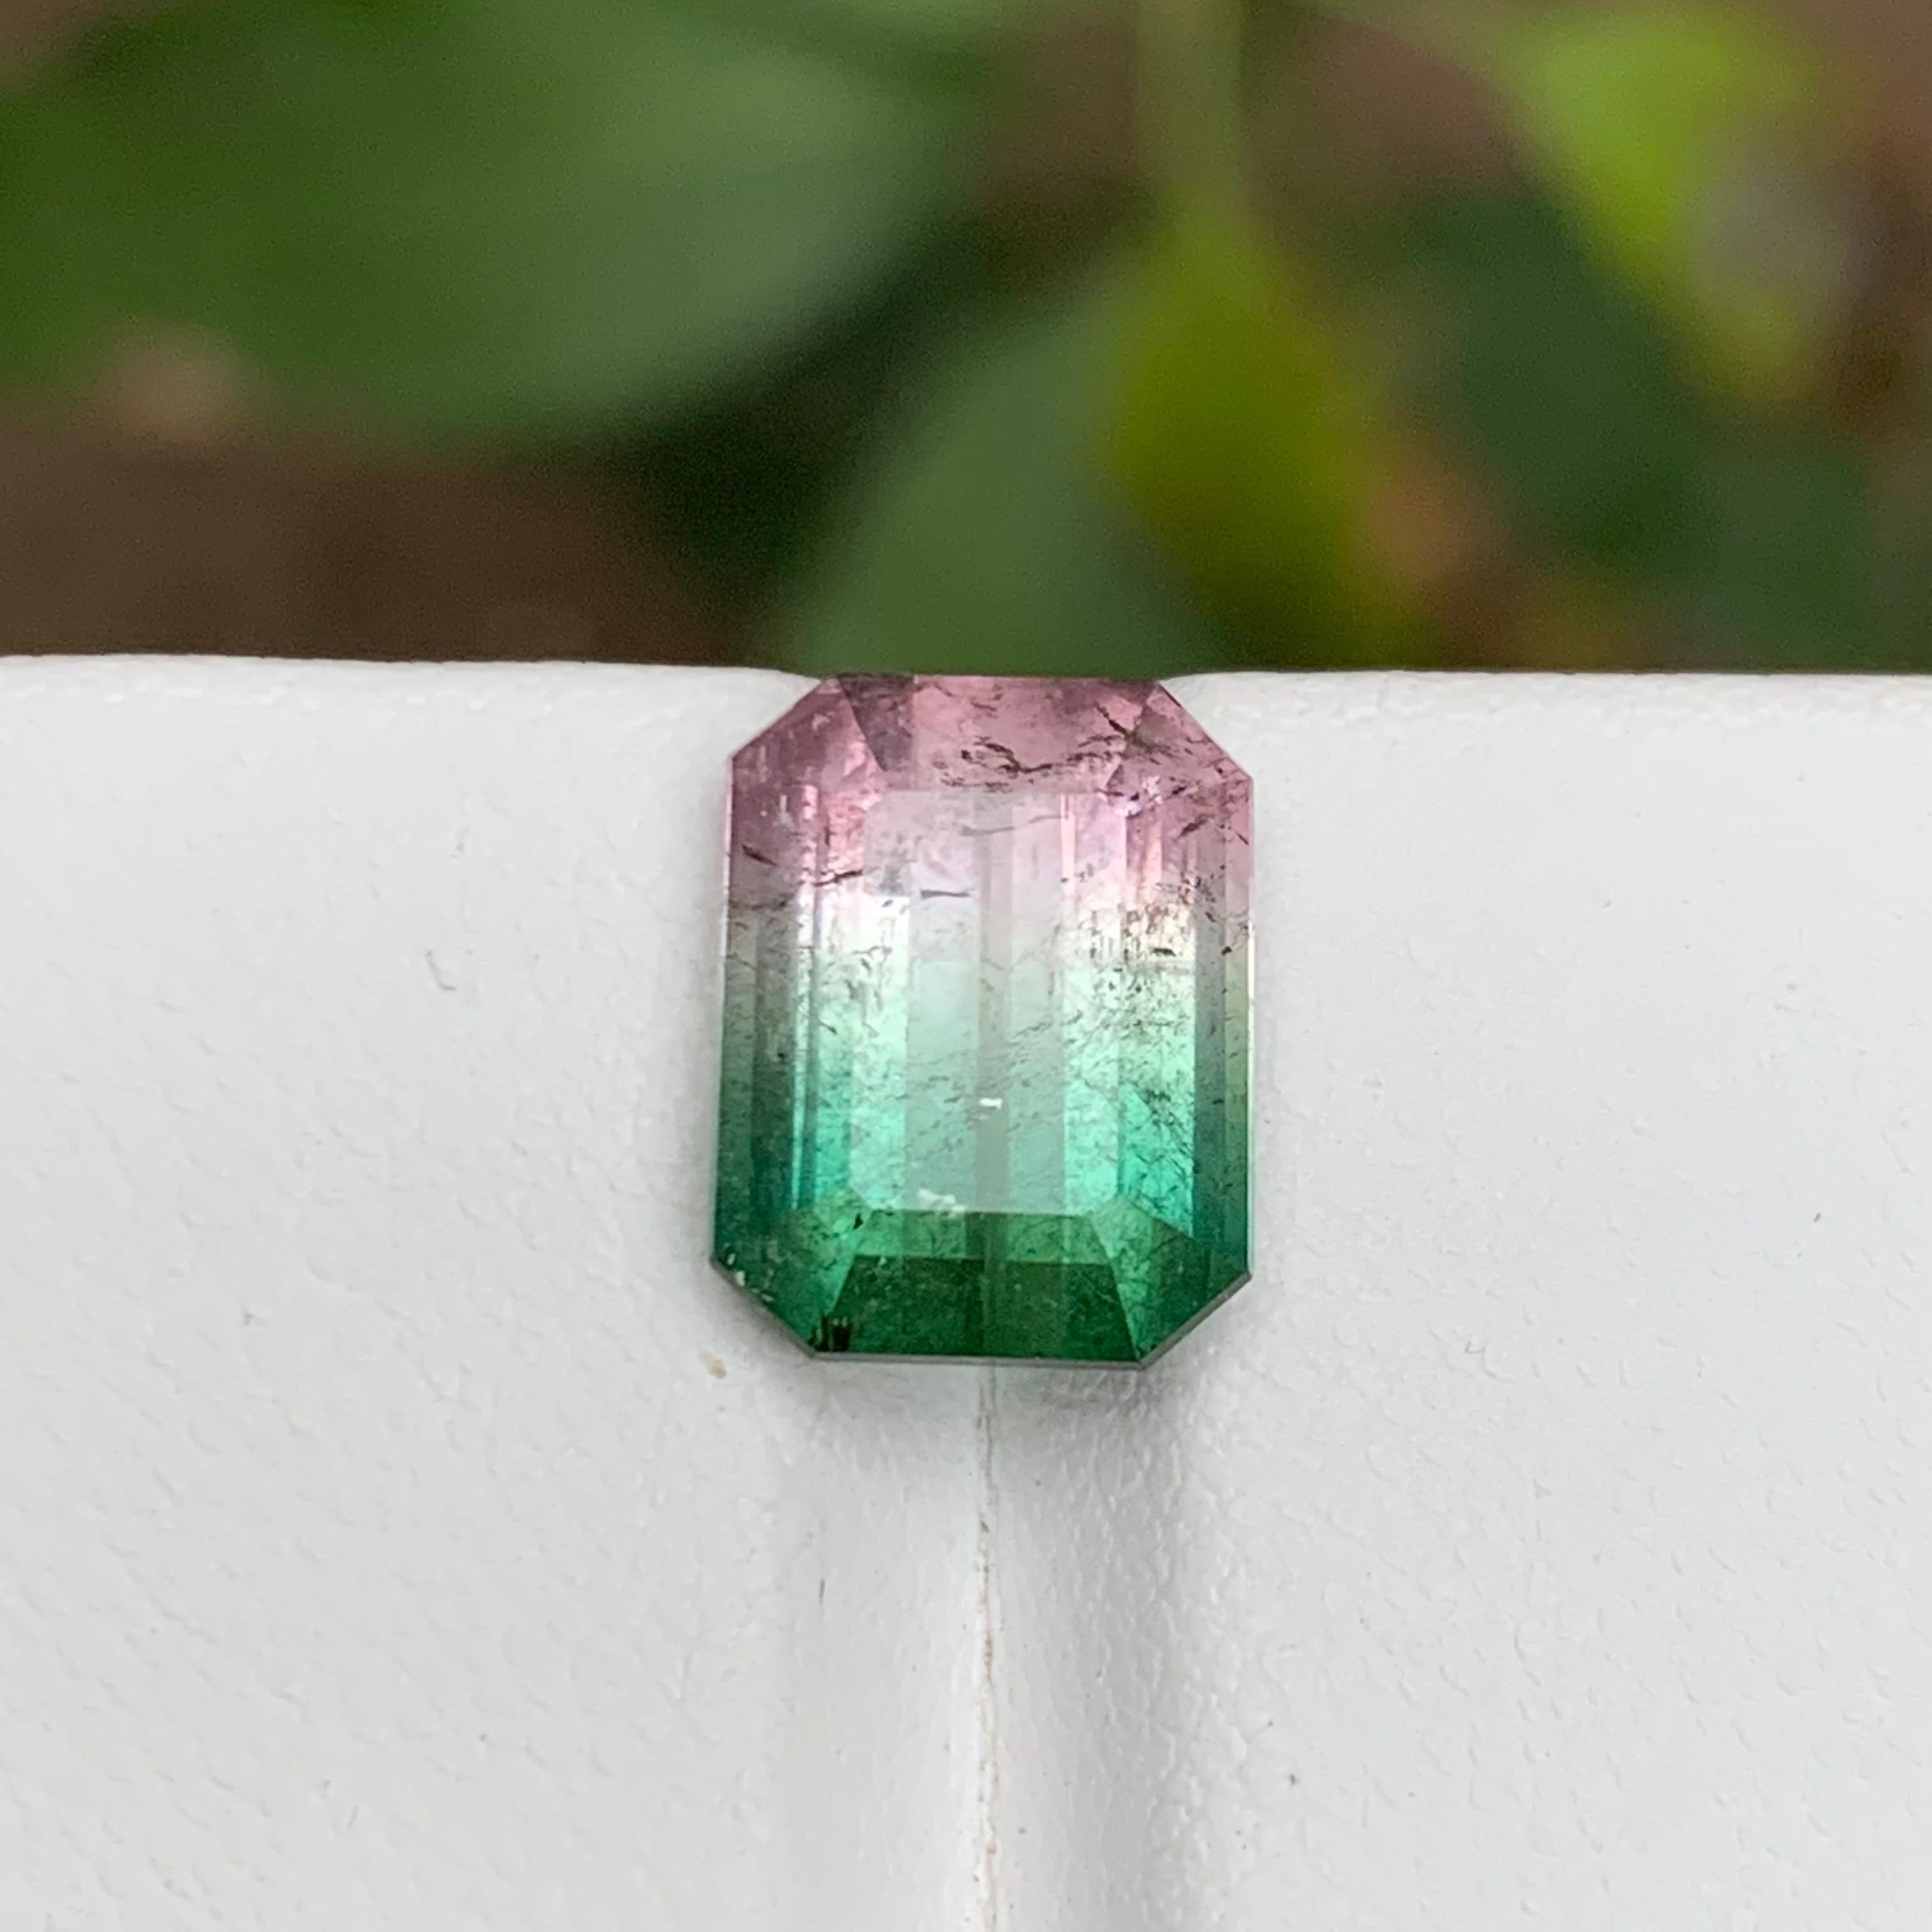 Rare Bicolor Watermelon Bluish Green & Pink Tourmaline Gemstone 5.90 Ct for Ring For Sale 6